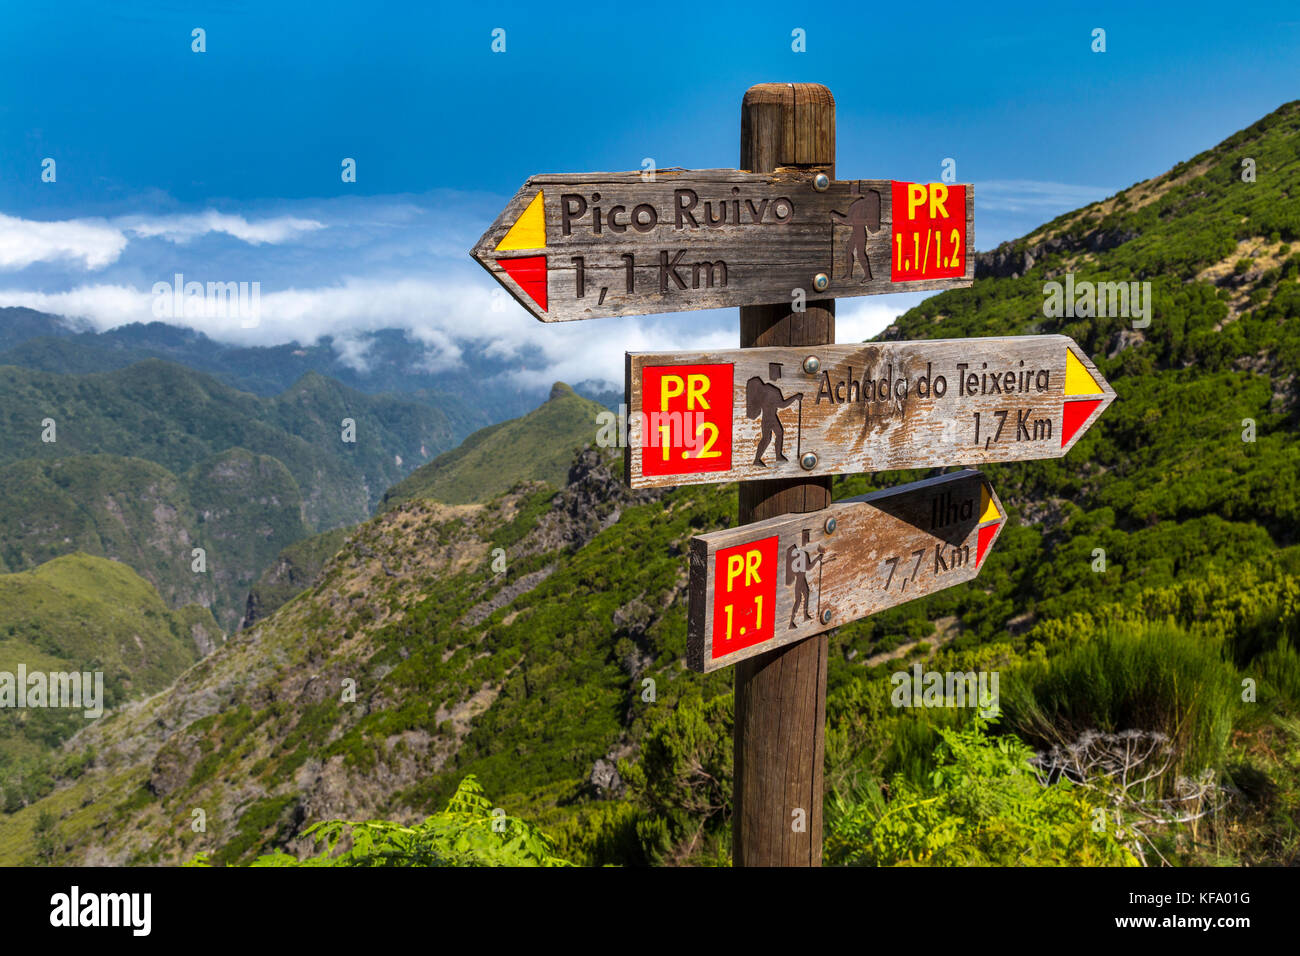 Directions sign along the trail from Pico do Arieiro to Pico Ruivo, Madeira, Portugal Stock Photo